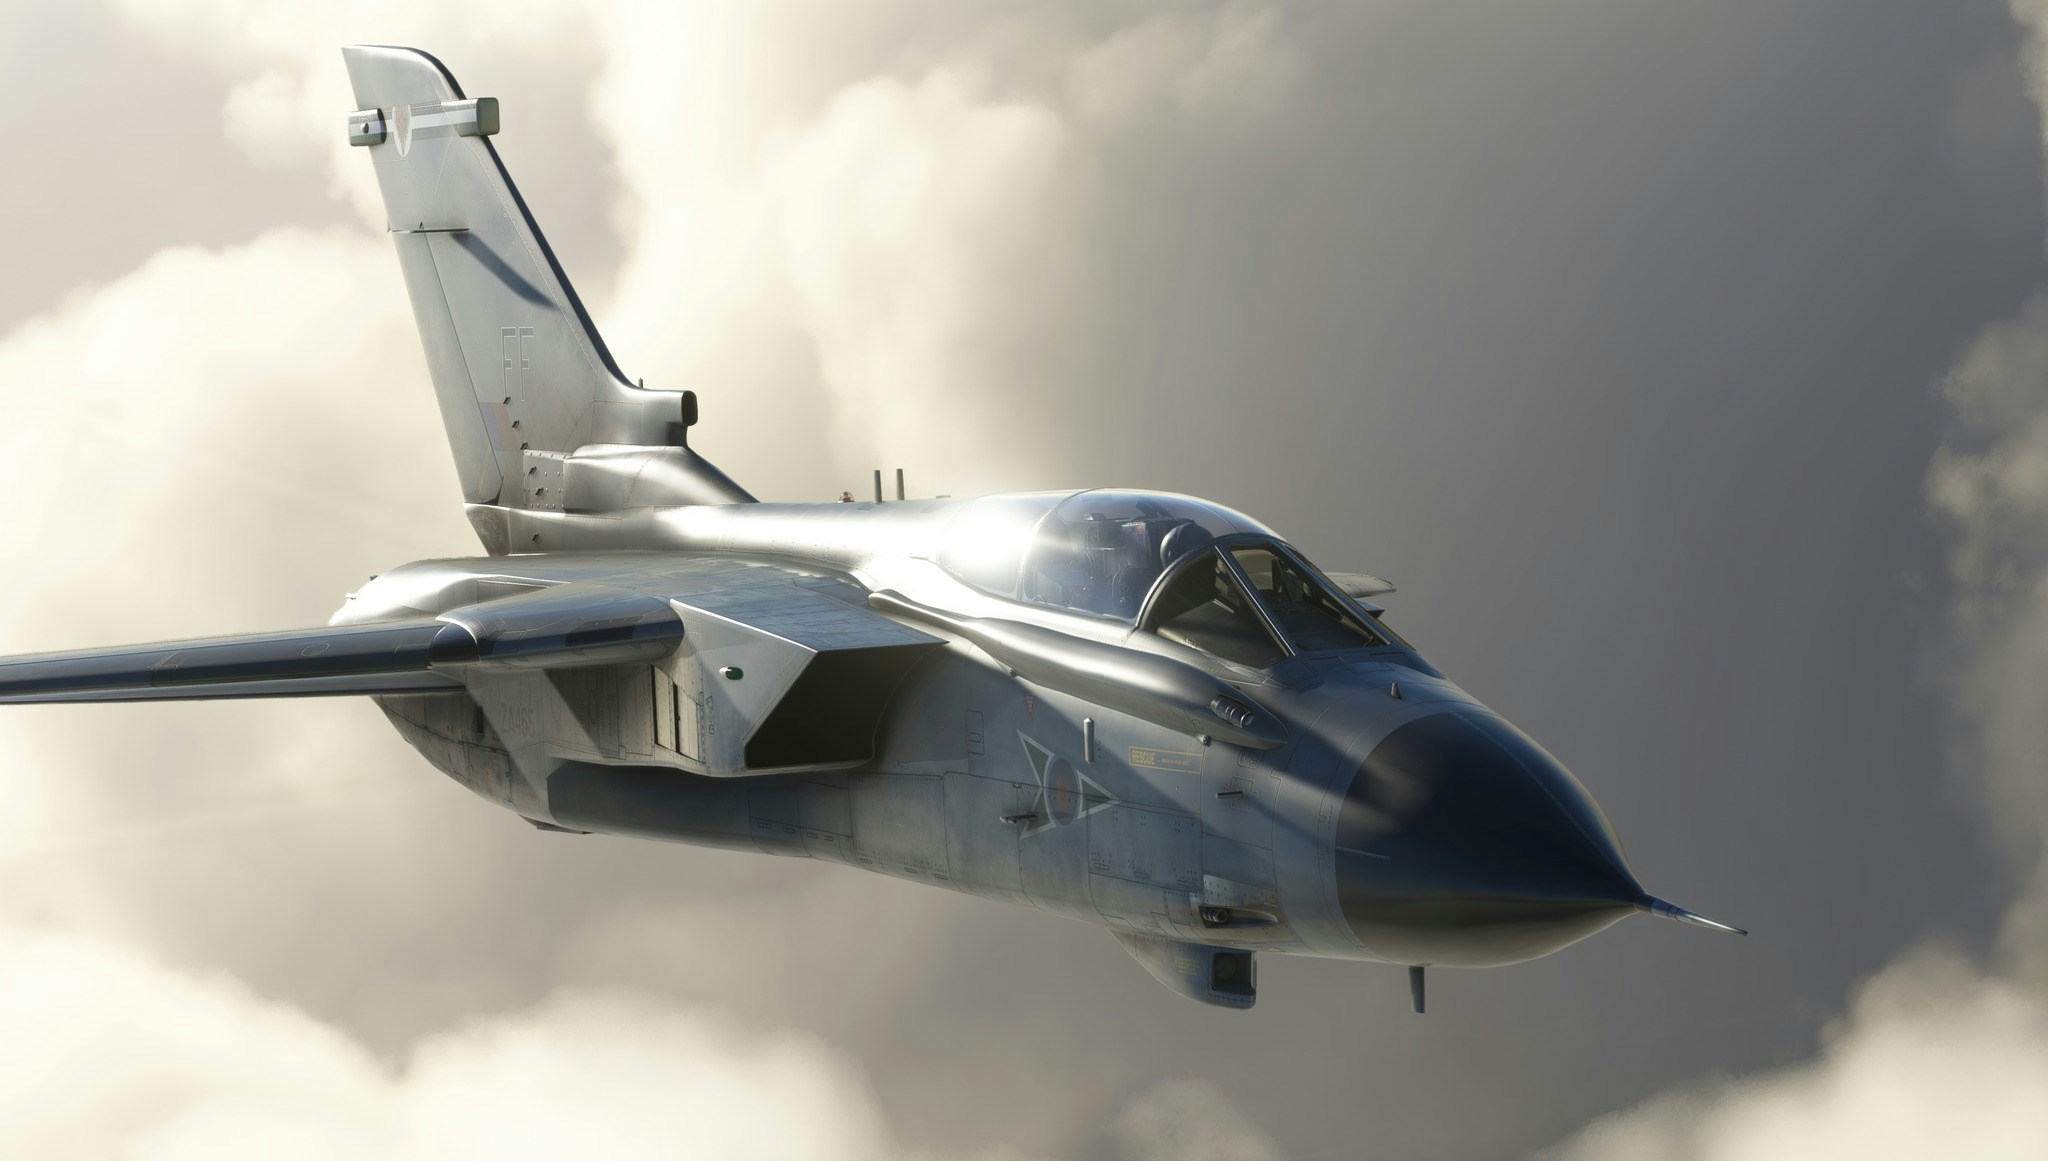 Just Flight Announces the Tornado GR1 for MSFS